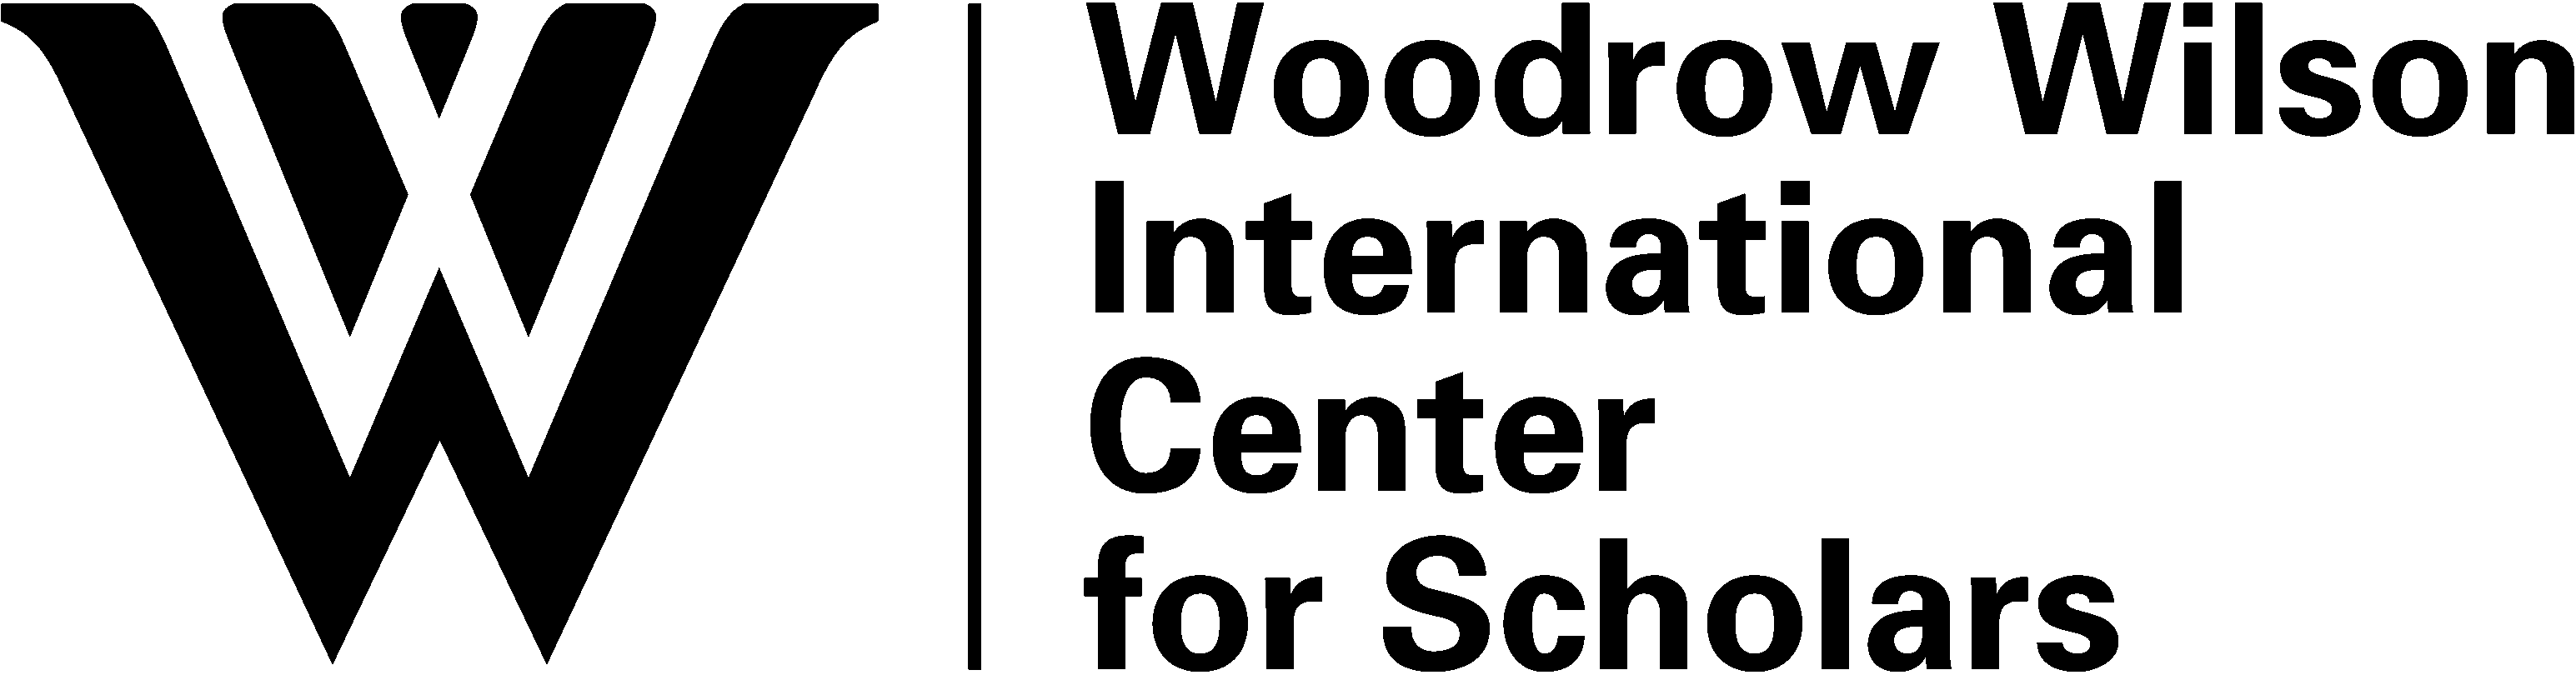 Woodrow Wilson International Center Residential Fellowships 2018/2019 in the USA (Funded)